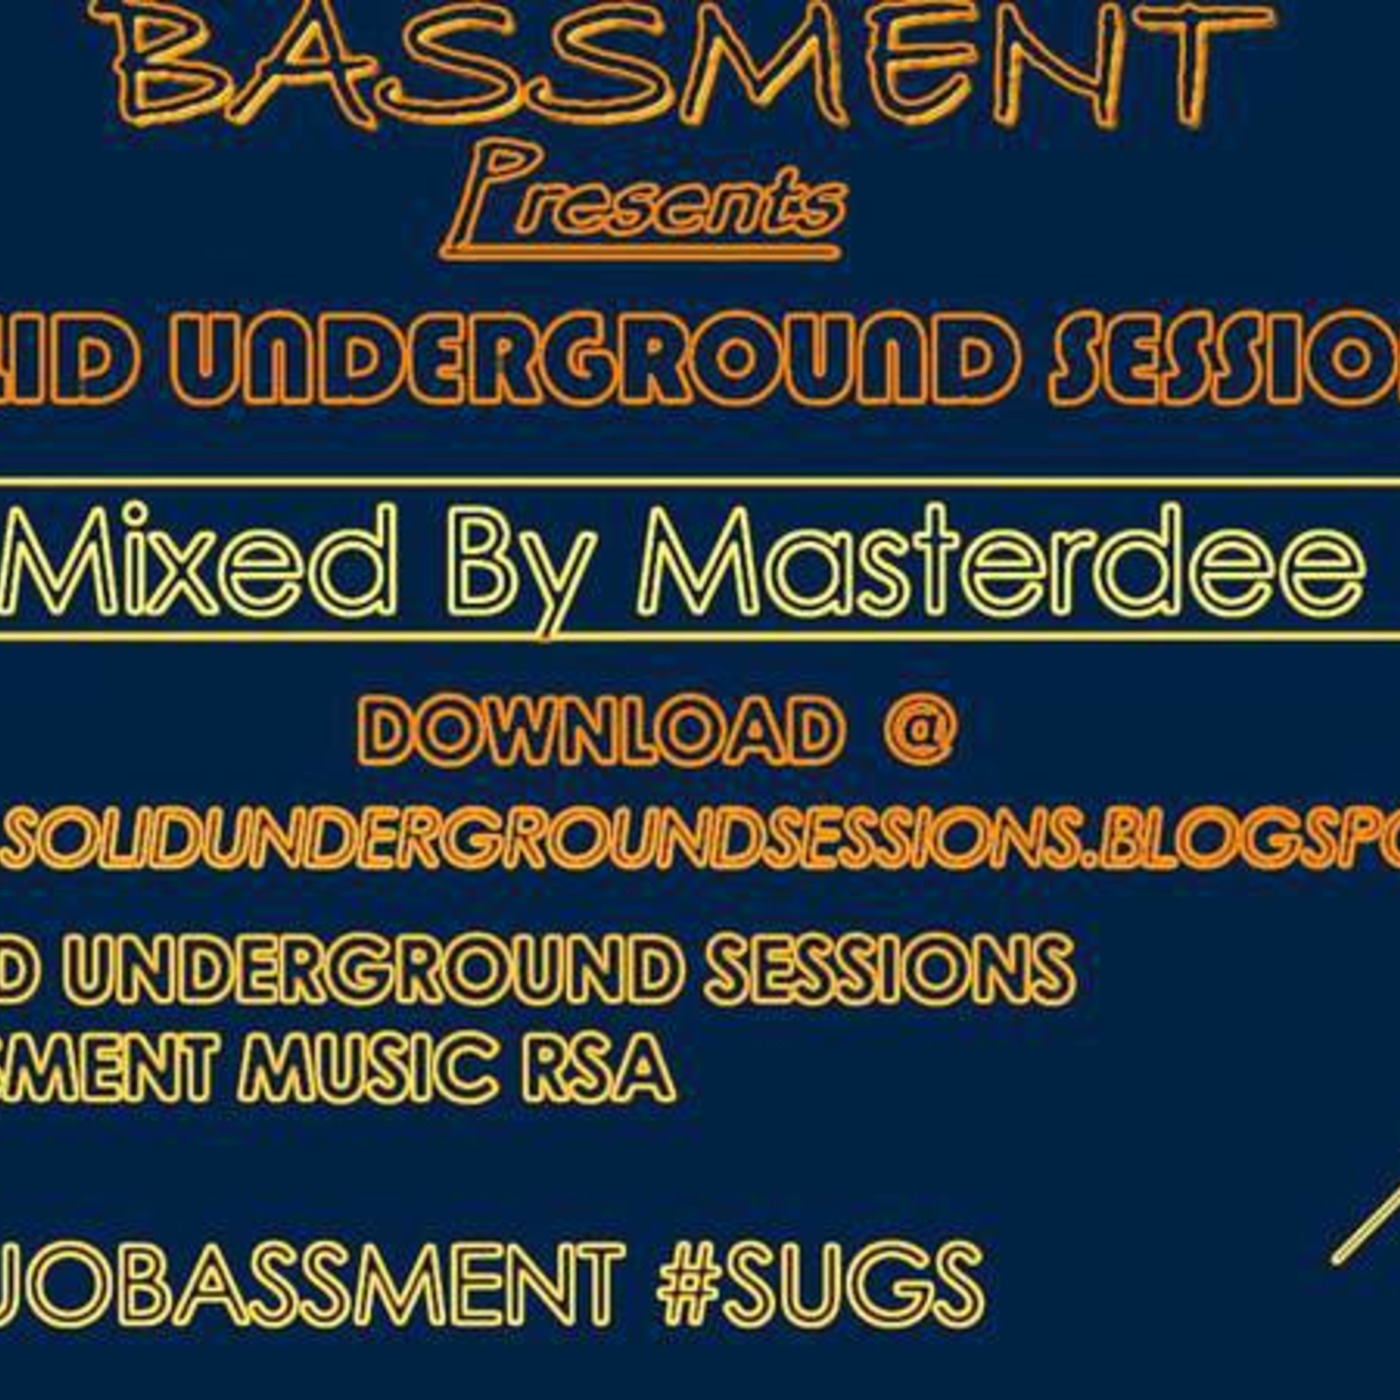 #2 Mixed By Masterdee.#SUGS